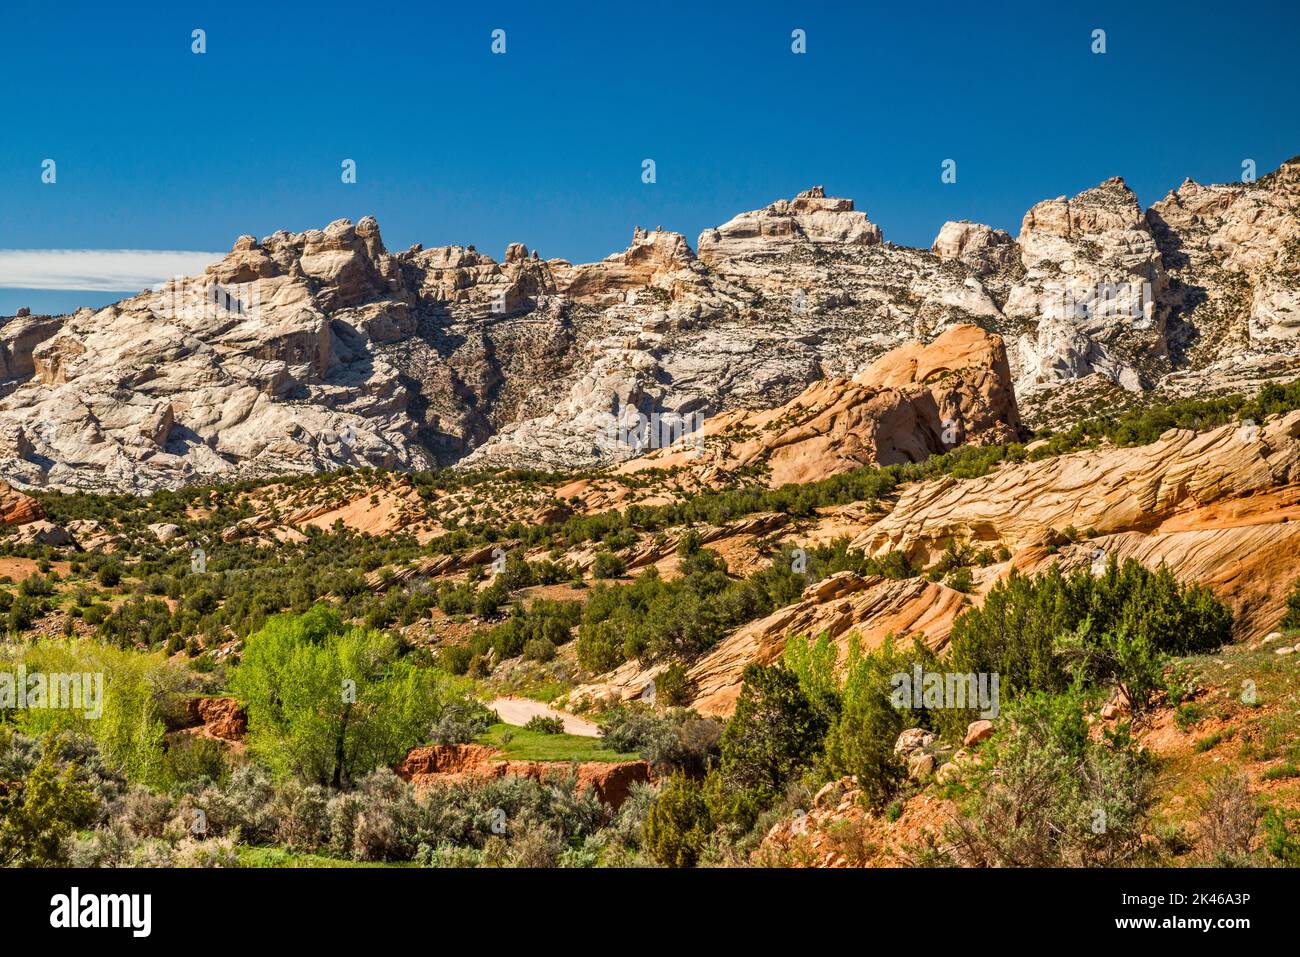 Rocks at Yampa Plateau, Split Mountain in distance, view from Cub Creek Road, Dinosaur National Monument, Utah, USA Stock Photo